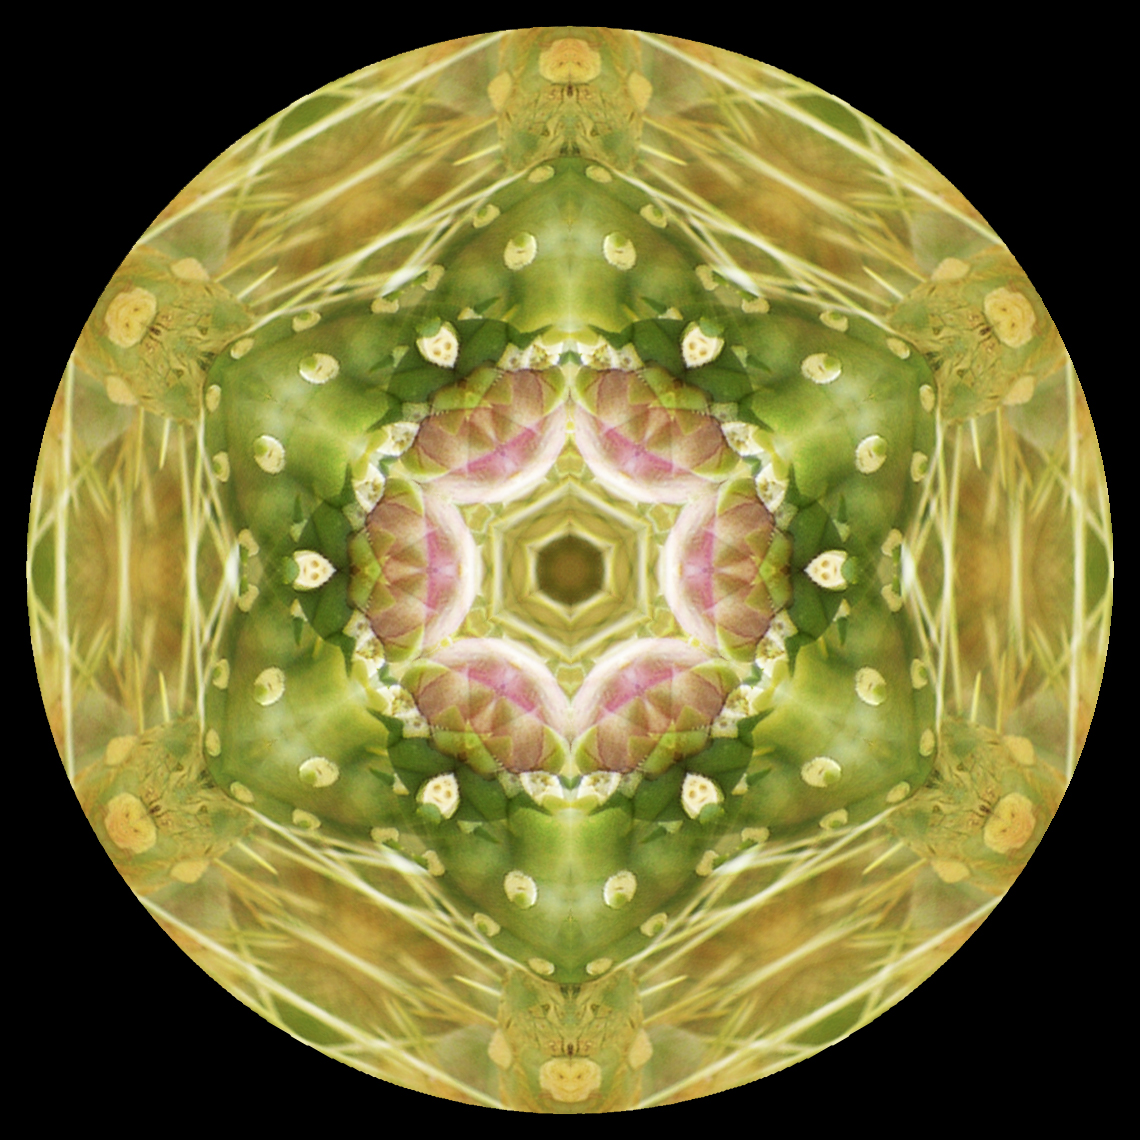 a green flower in the center of a circular shape